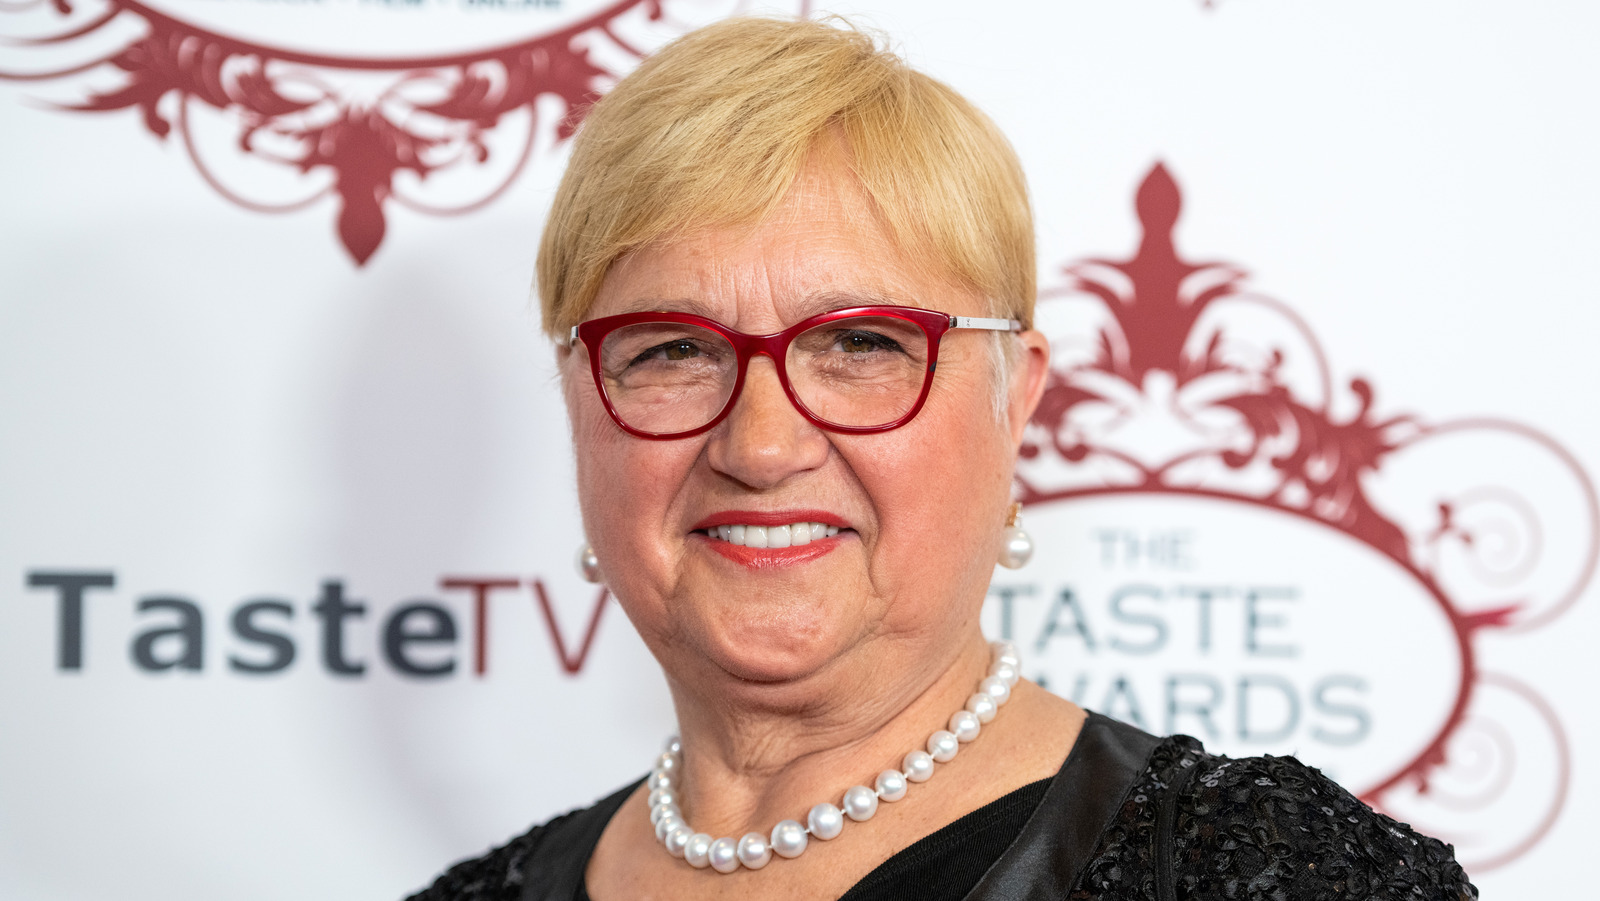 Why You Should Stop Adding Oil To Pasta Water ASAP According To Lidia
Bastianich